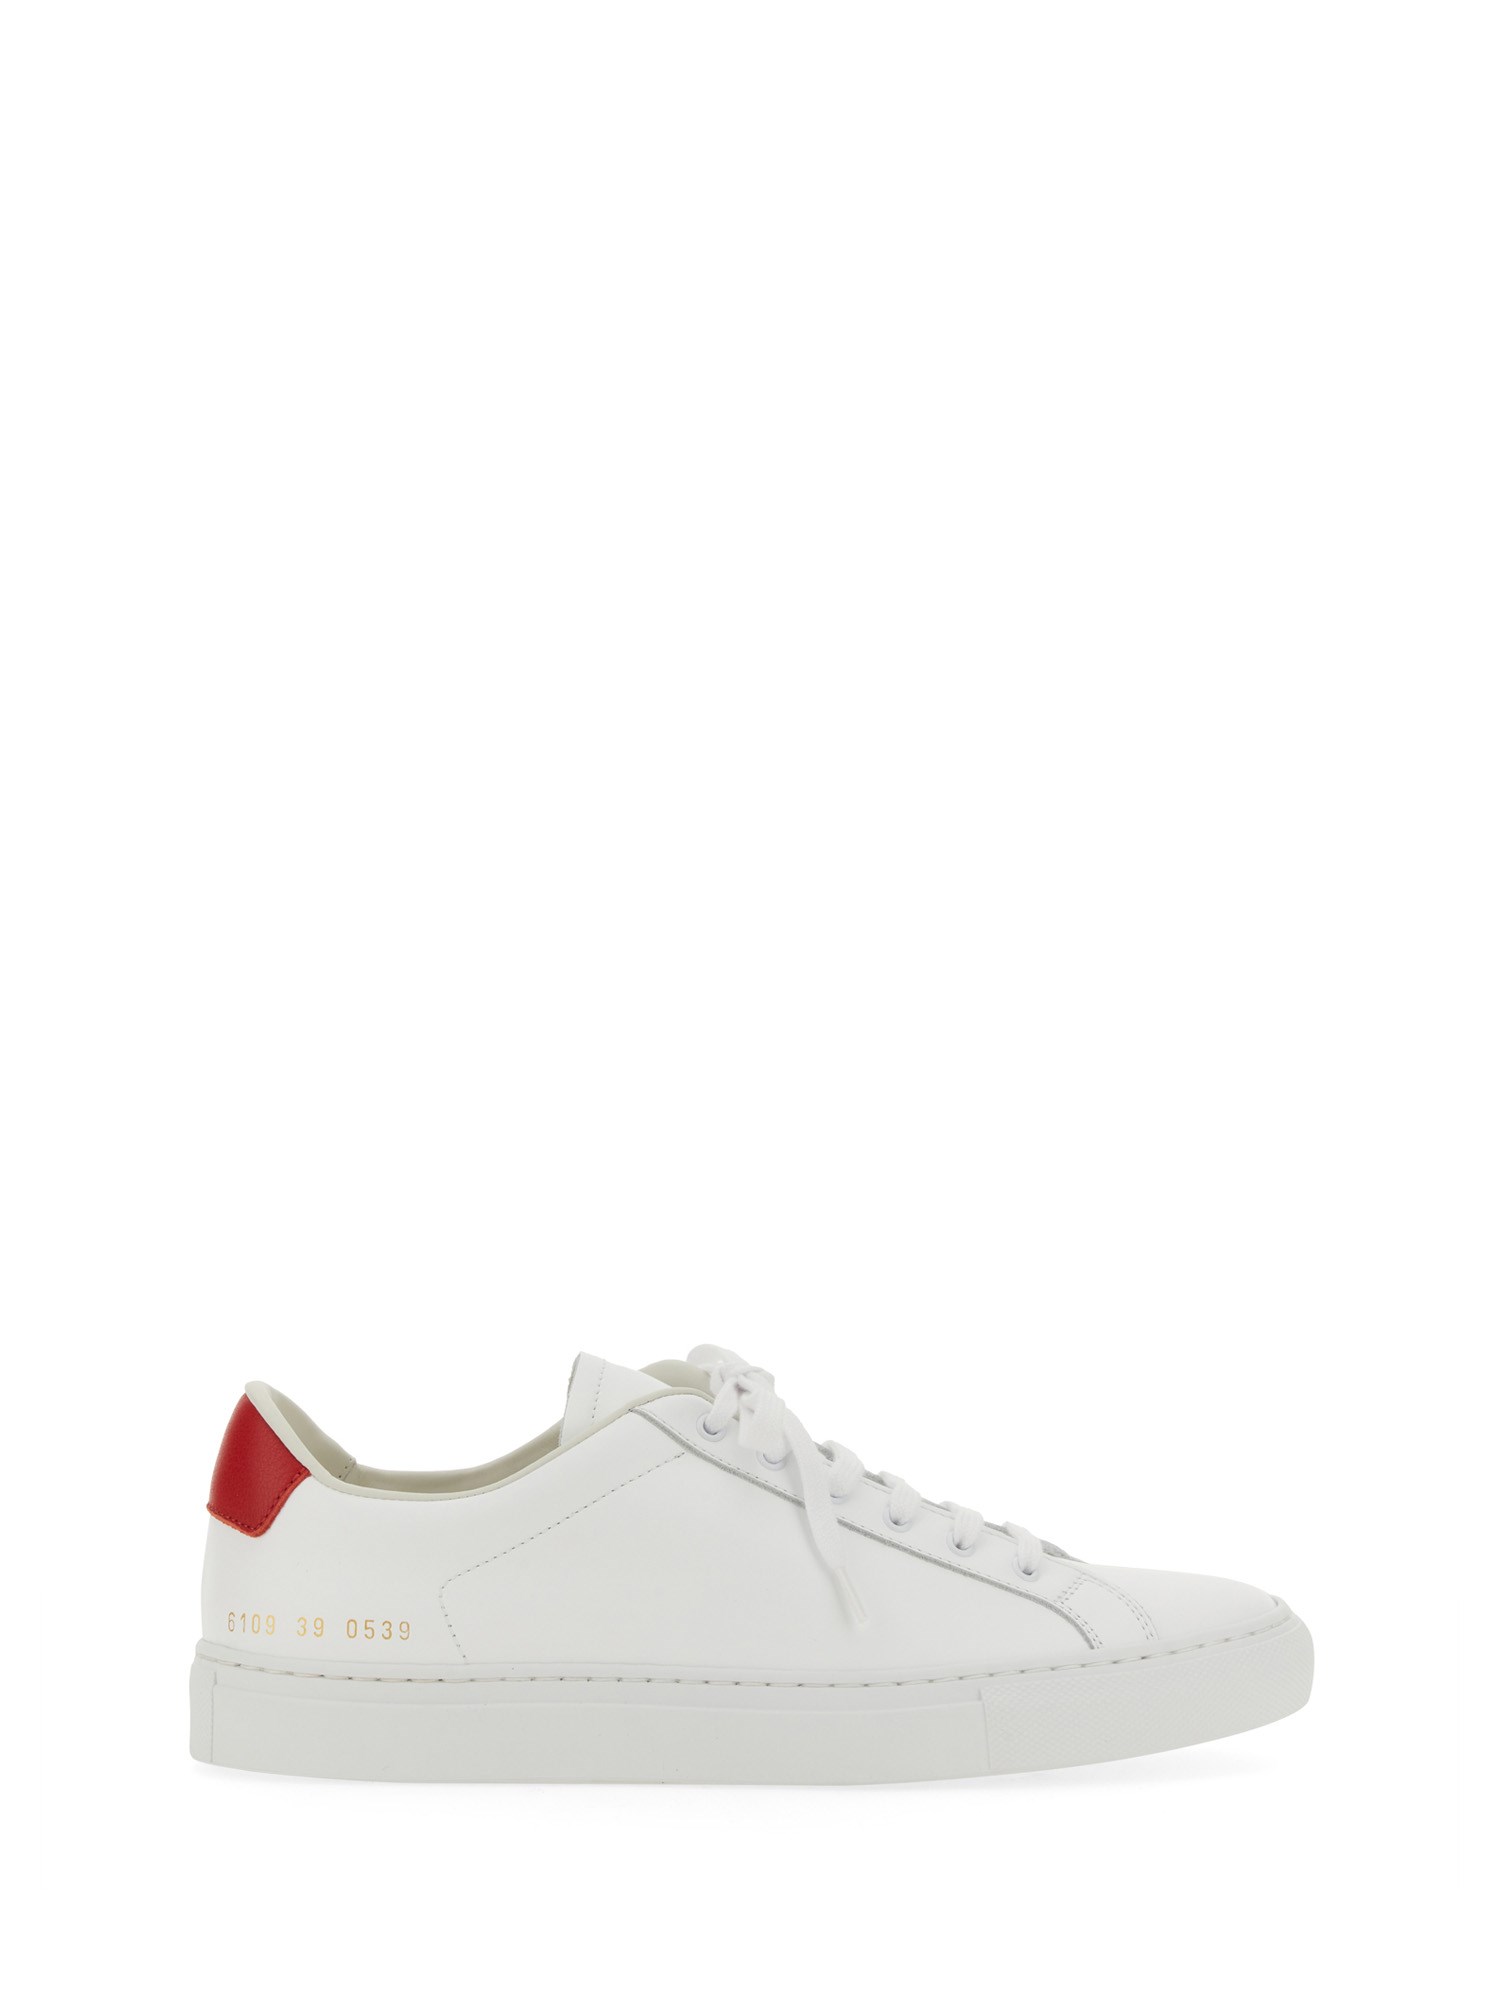 COMMON PROJECTS RETRO LOW SNEAKER